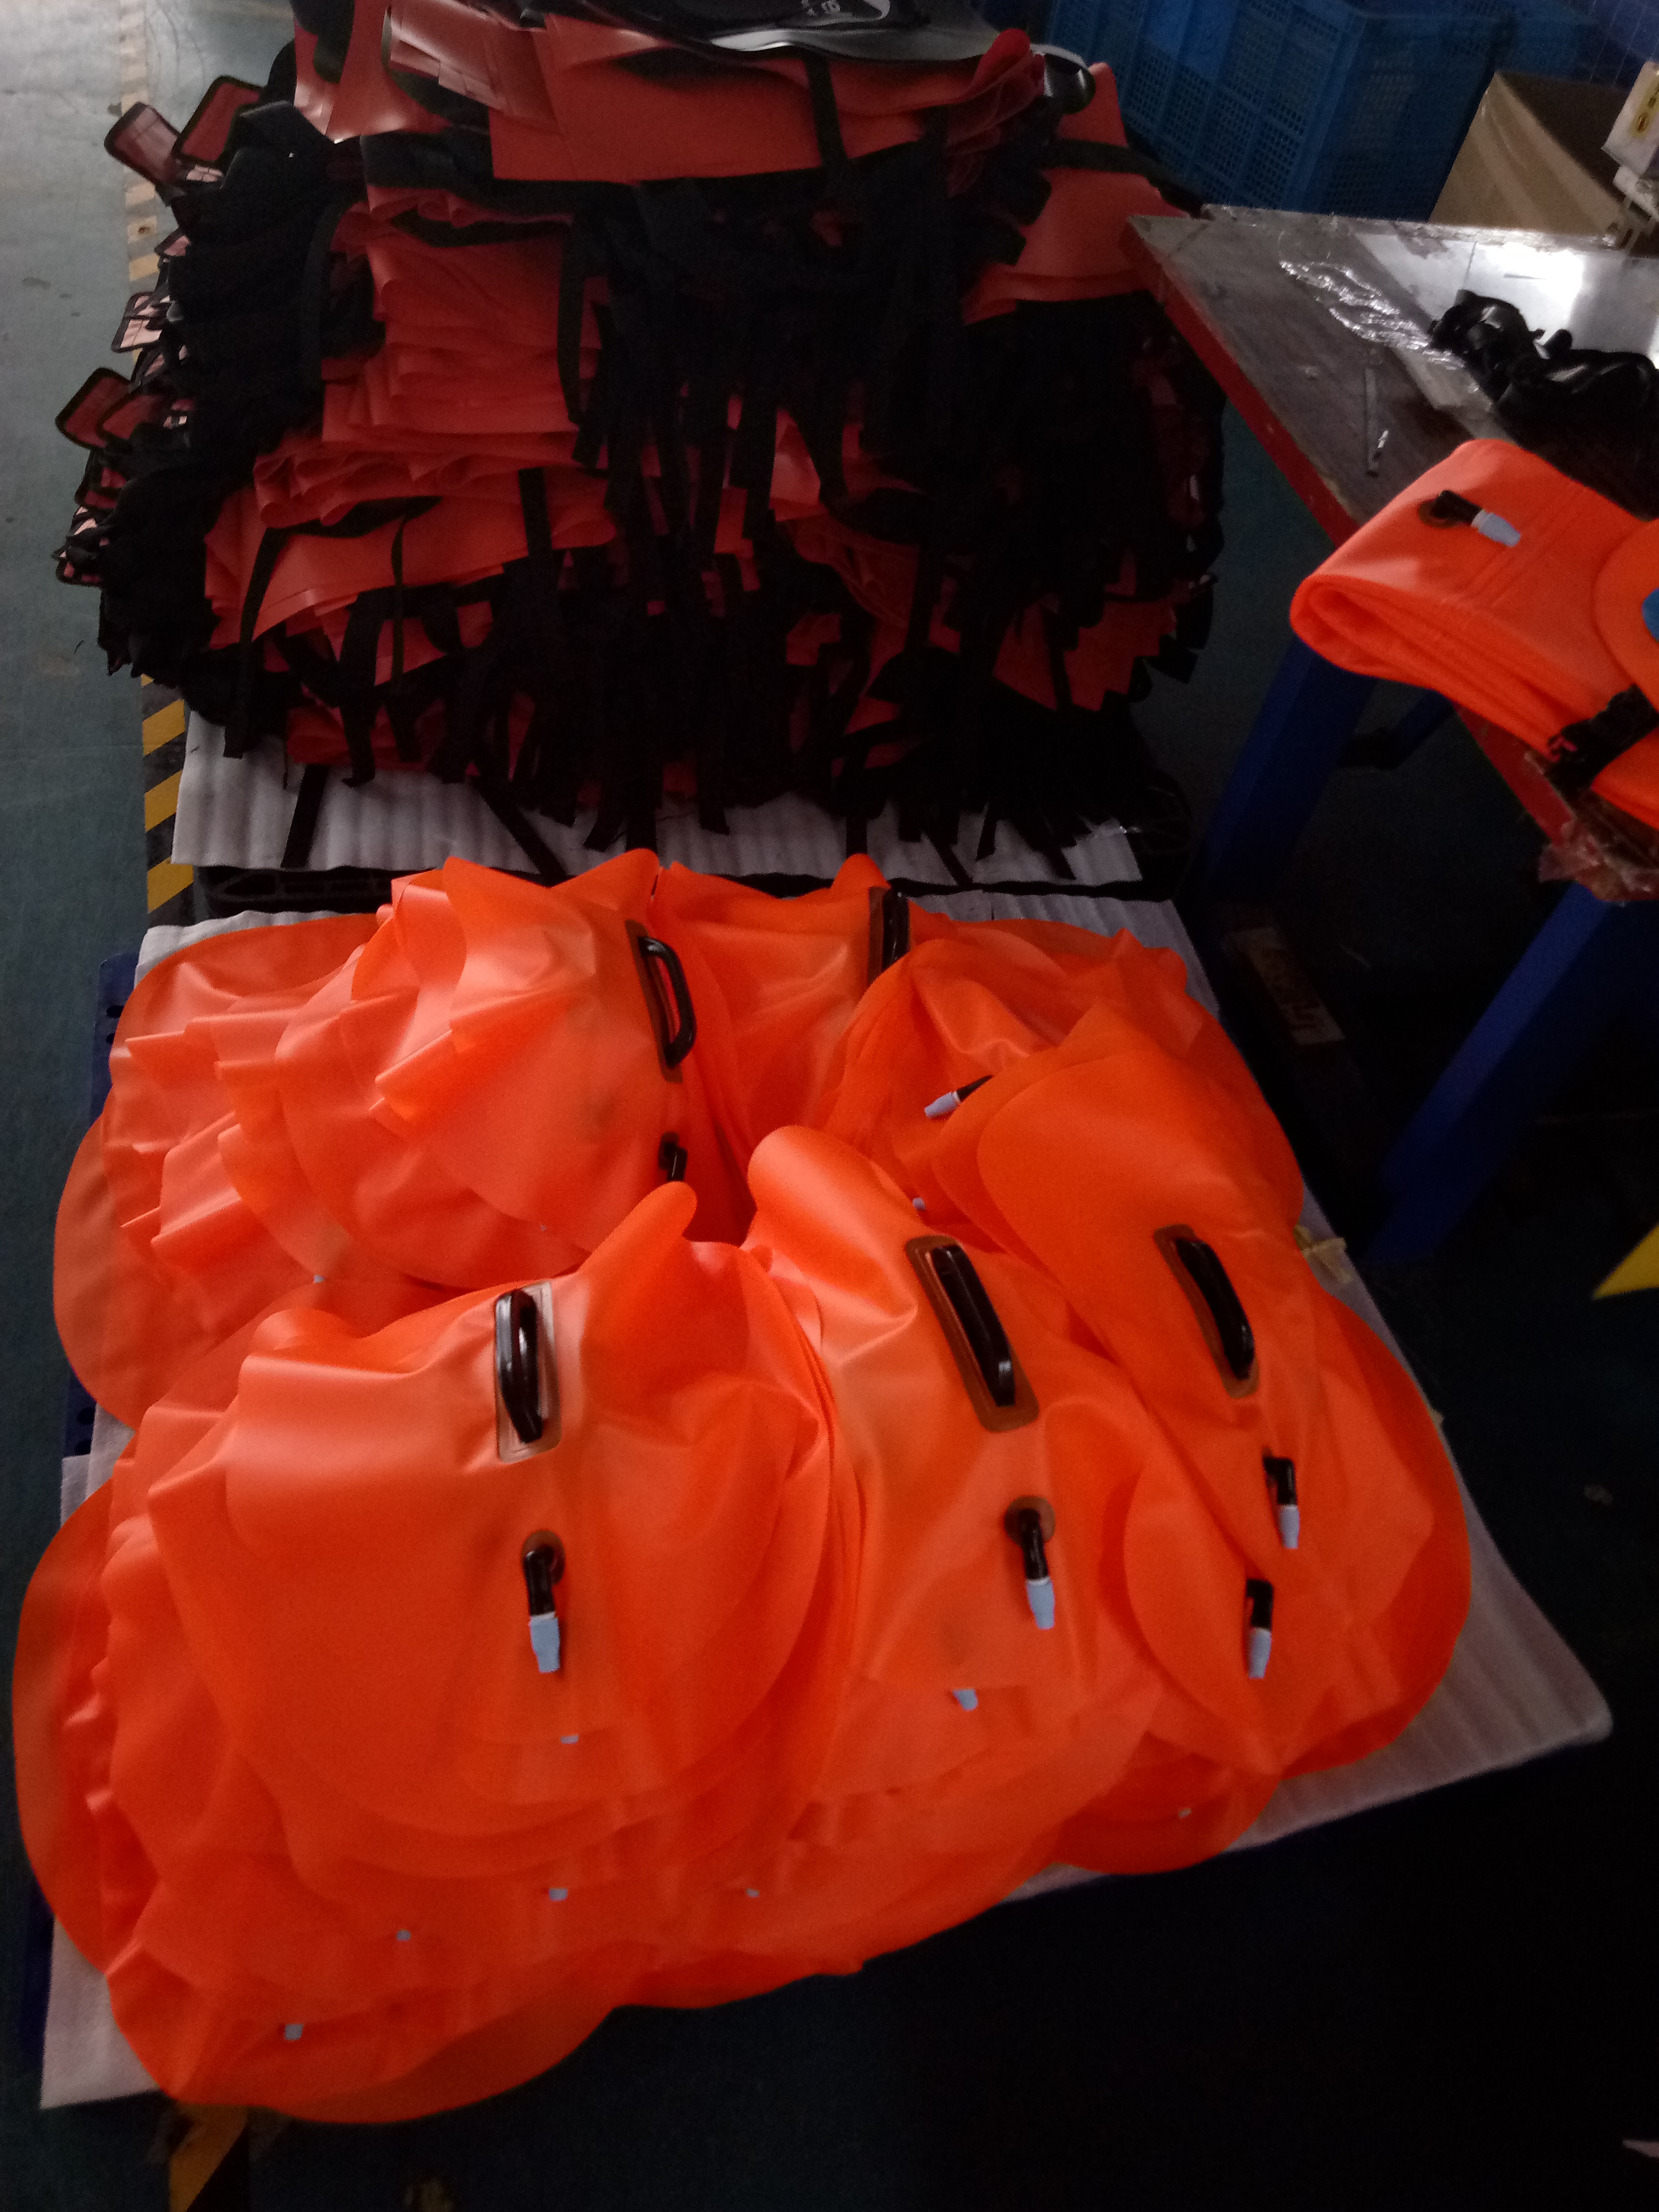 What are the advantages of swimming buoys/floating bags?